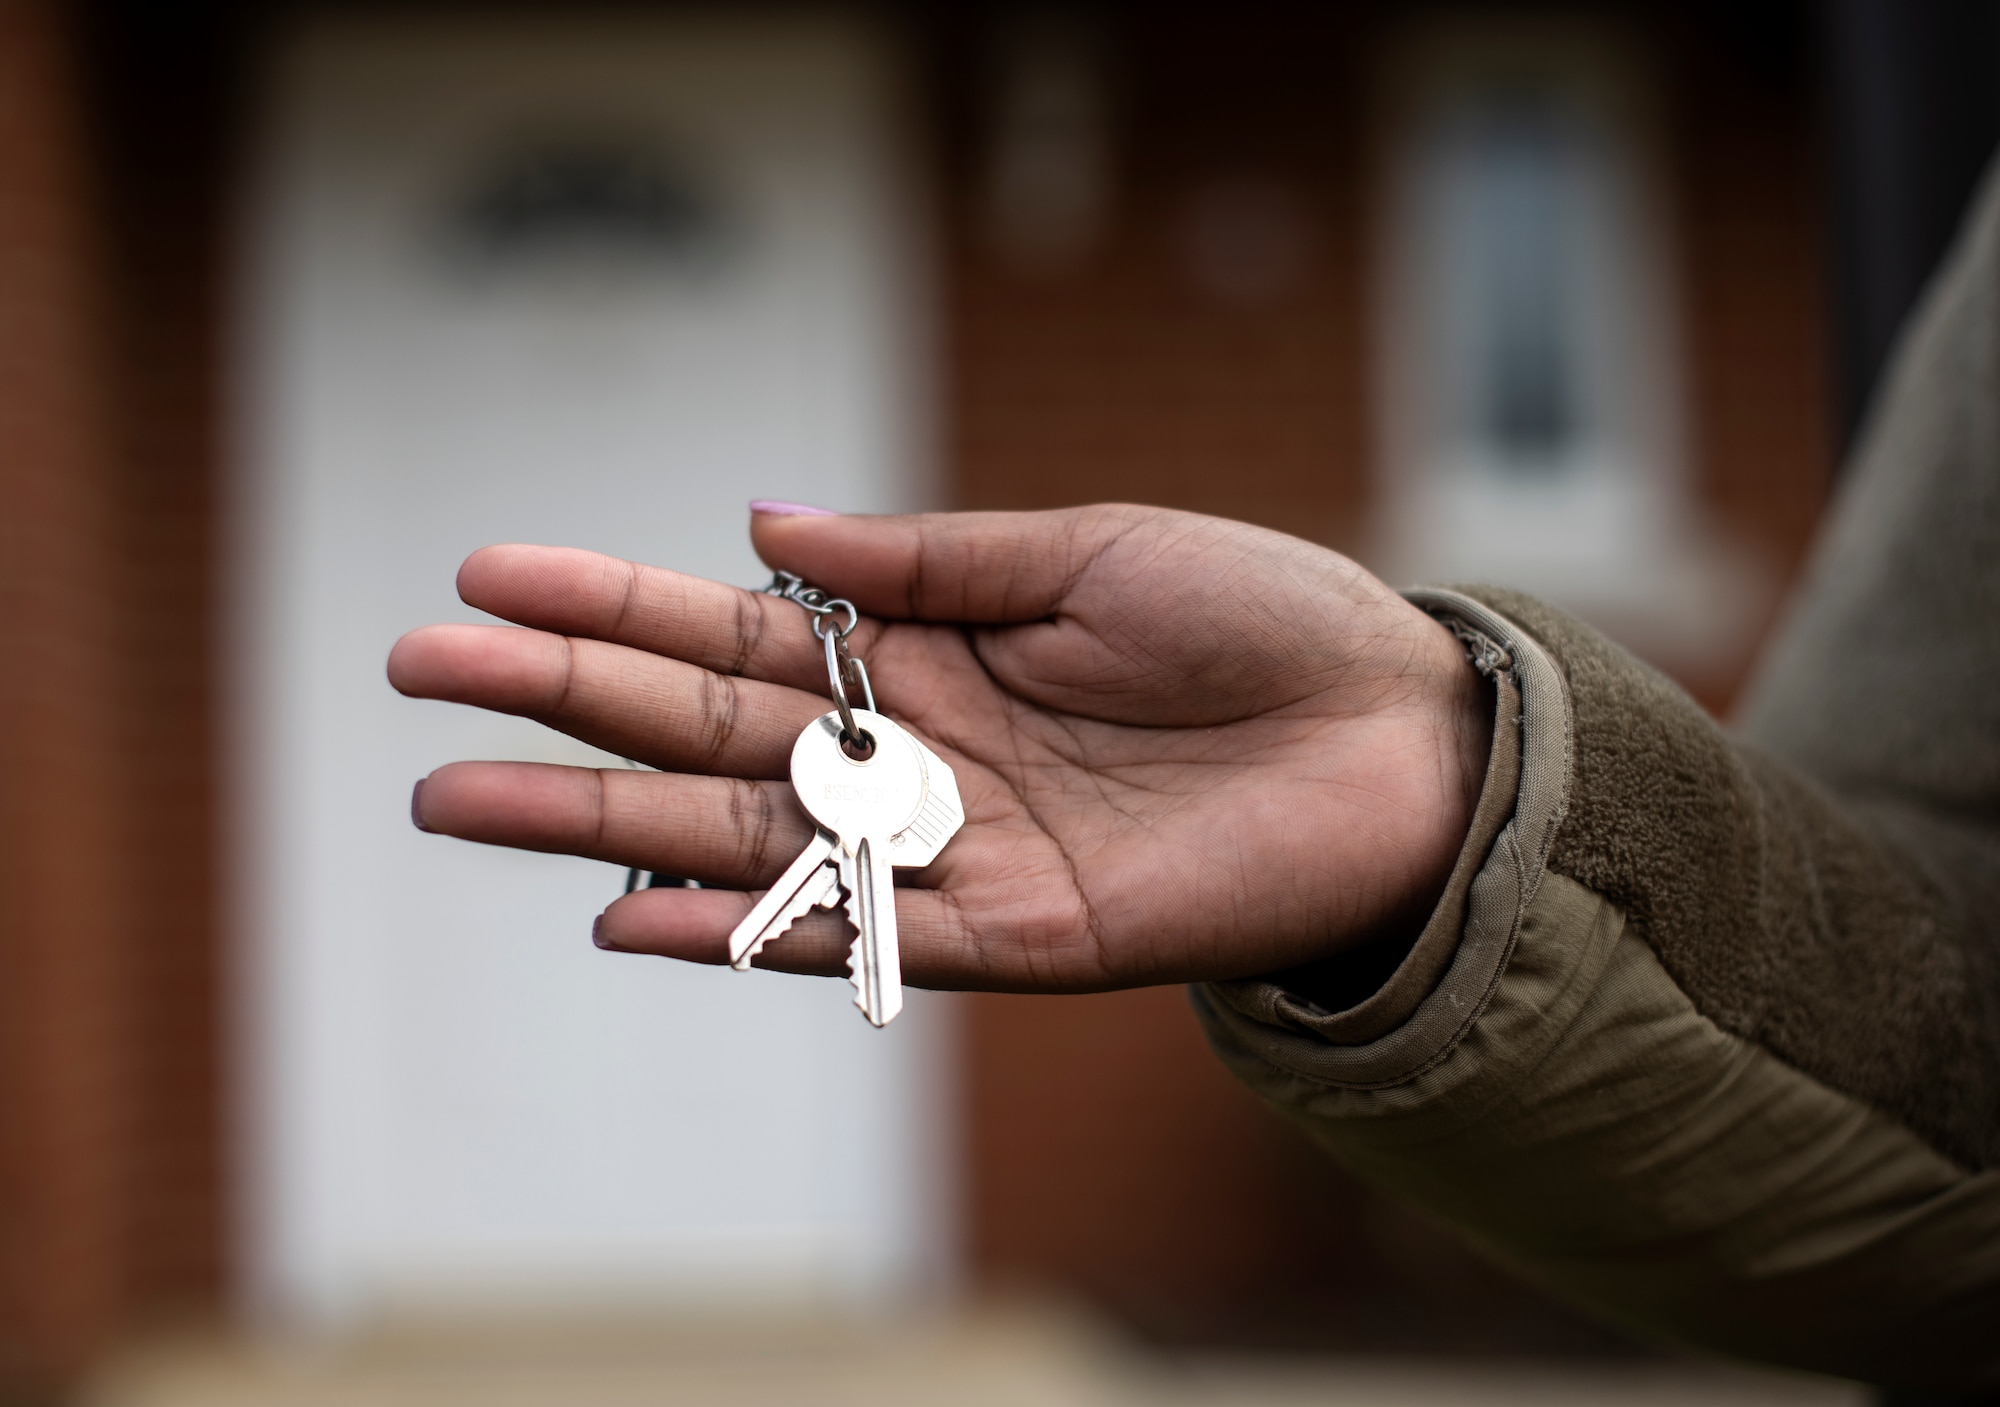 A U.S. Air Force Airman from the 48th Fighter Wing holds the keys to a new house near Royal Air Force Lakenheath, England, Oct. 13, 2020. The 48th FW housing office introduced the Rental Partnership Program in Sept. 2020, an avenue to ease the stress of house hunting for members assigned to RAF Lakenheath, RAF Mildenhall and RAF Feltwell. (U.S. Air Force photo by Airman 1st Class Jessi Monte)